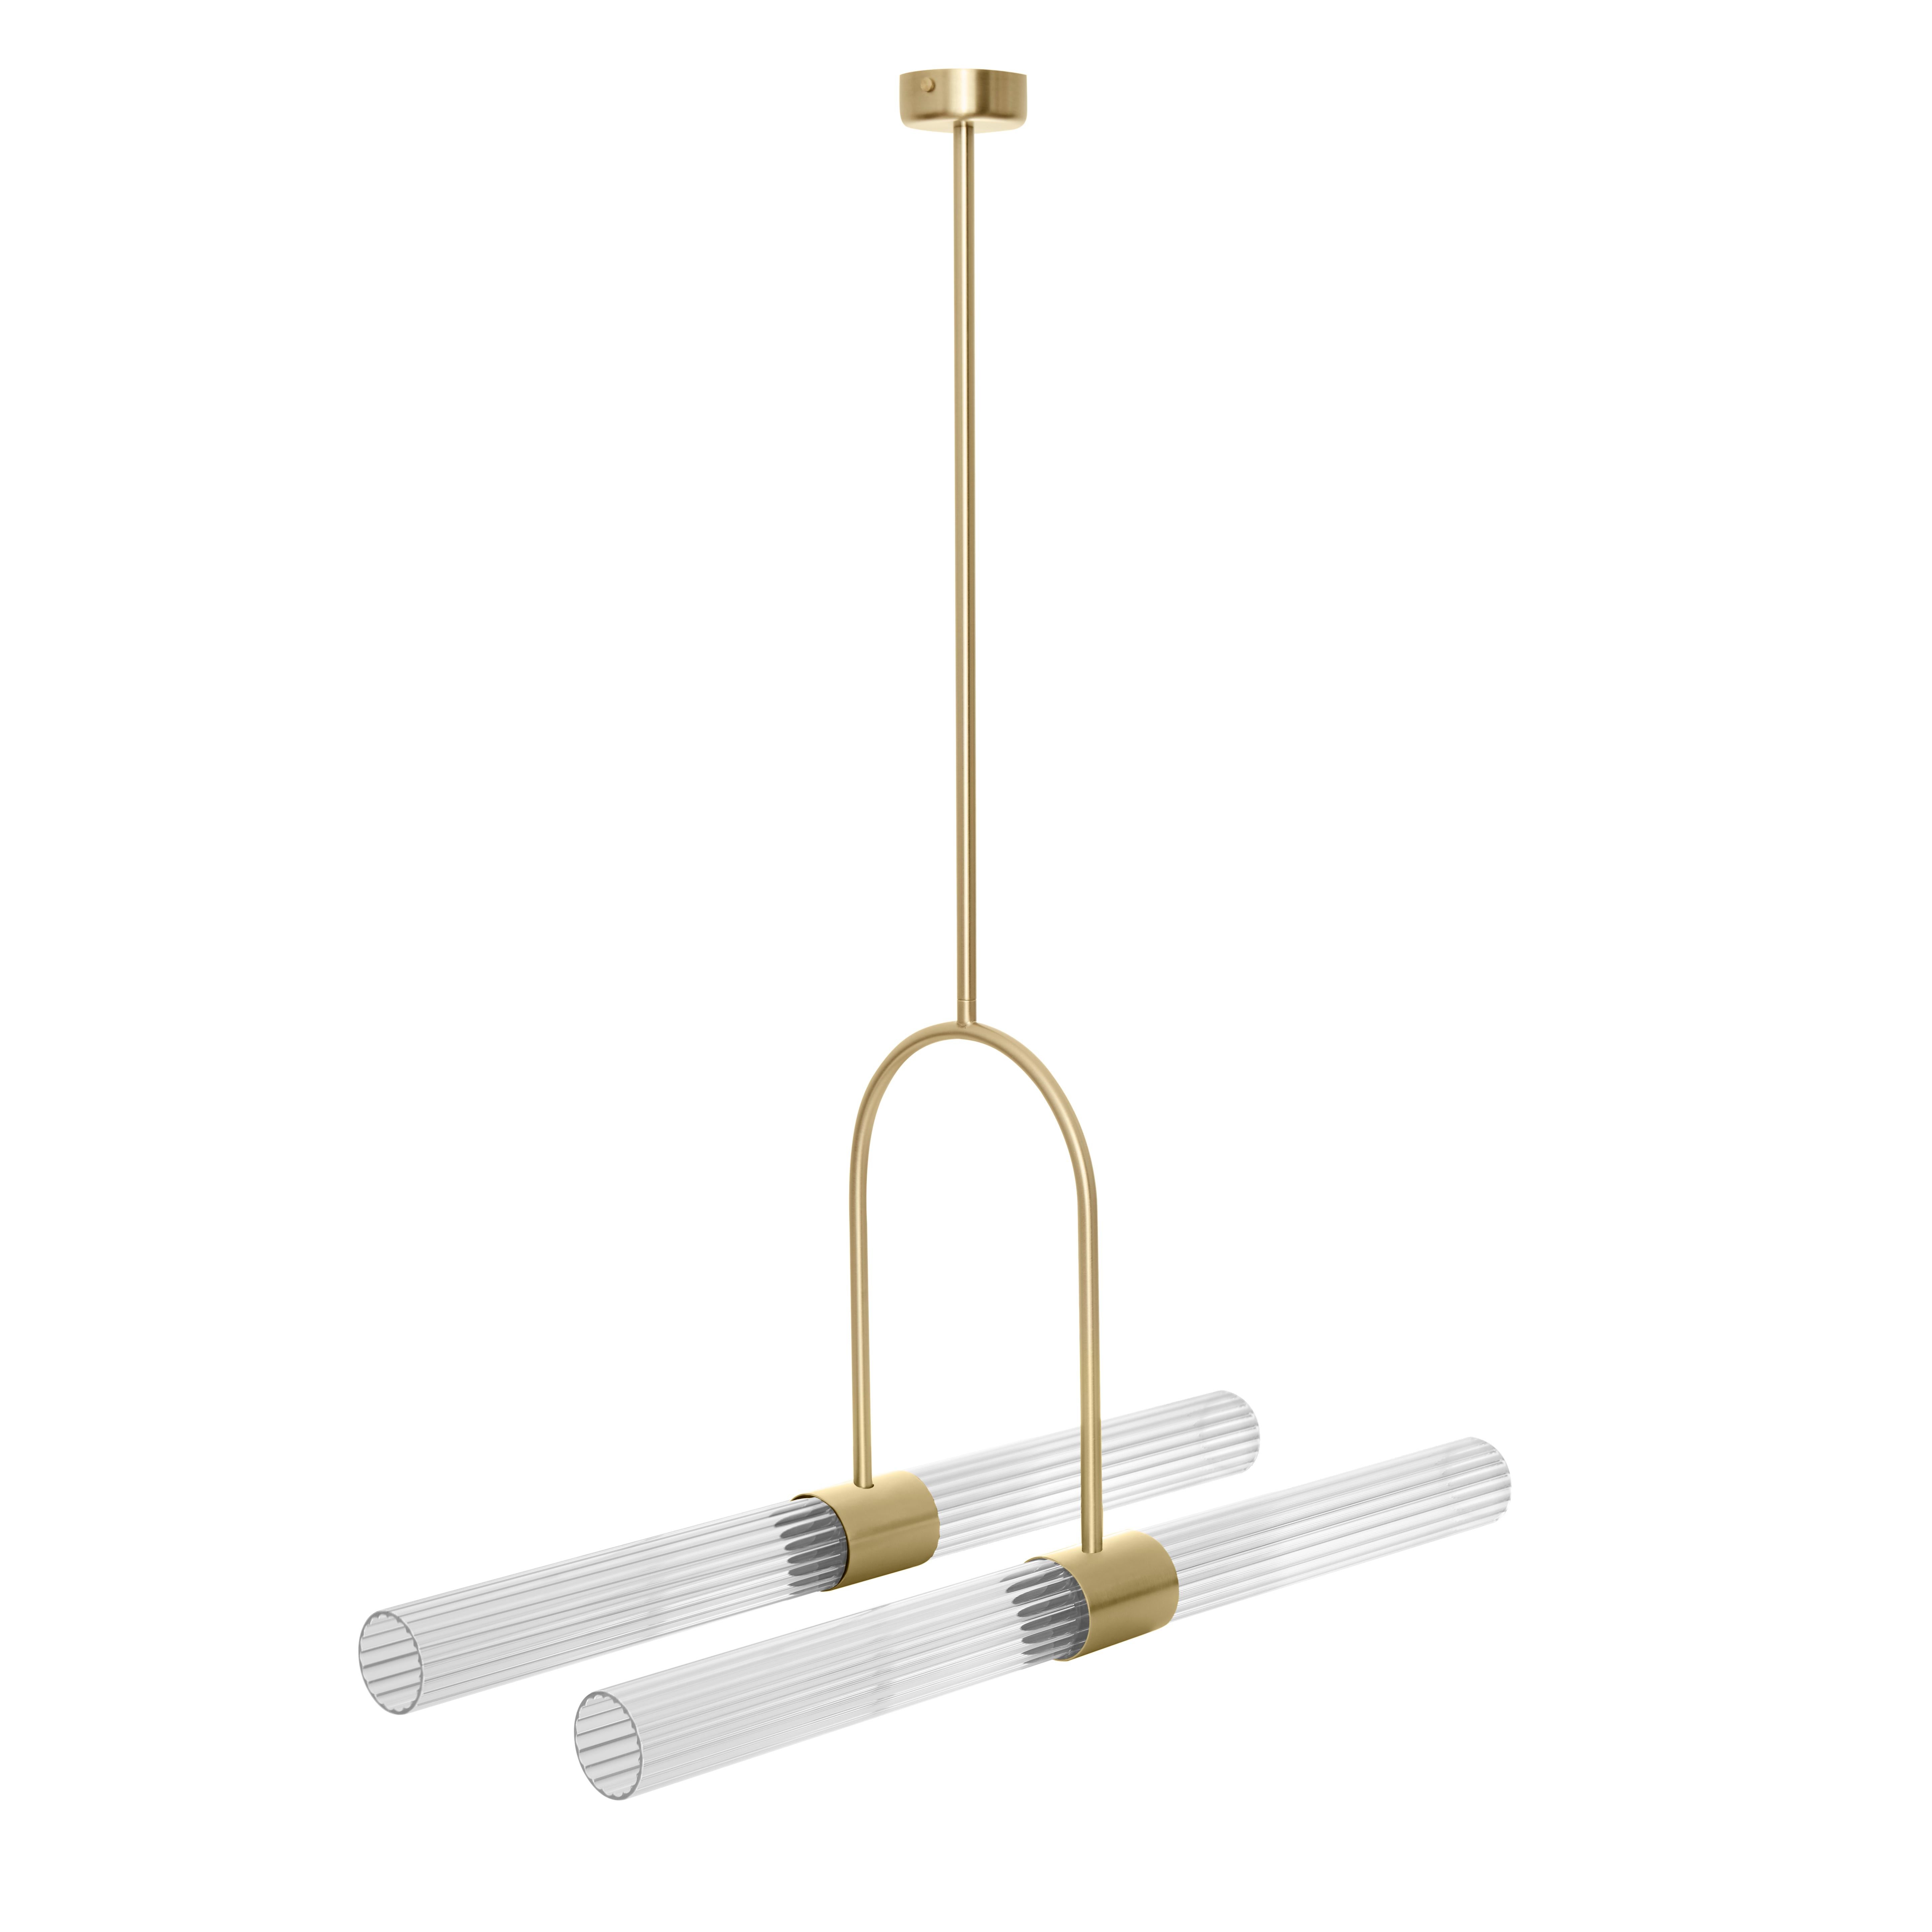 Sbarlusc pendant lamp by Luce Tu
Dimensions: 71.4 x 35-75 cm
Materials: Brass and glass

State-of-the-art technology and craftsmanship come together in this suspension with an almost timeless charm. Like a precious jewel, the Sbarlusc collection